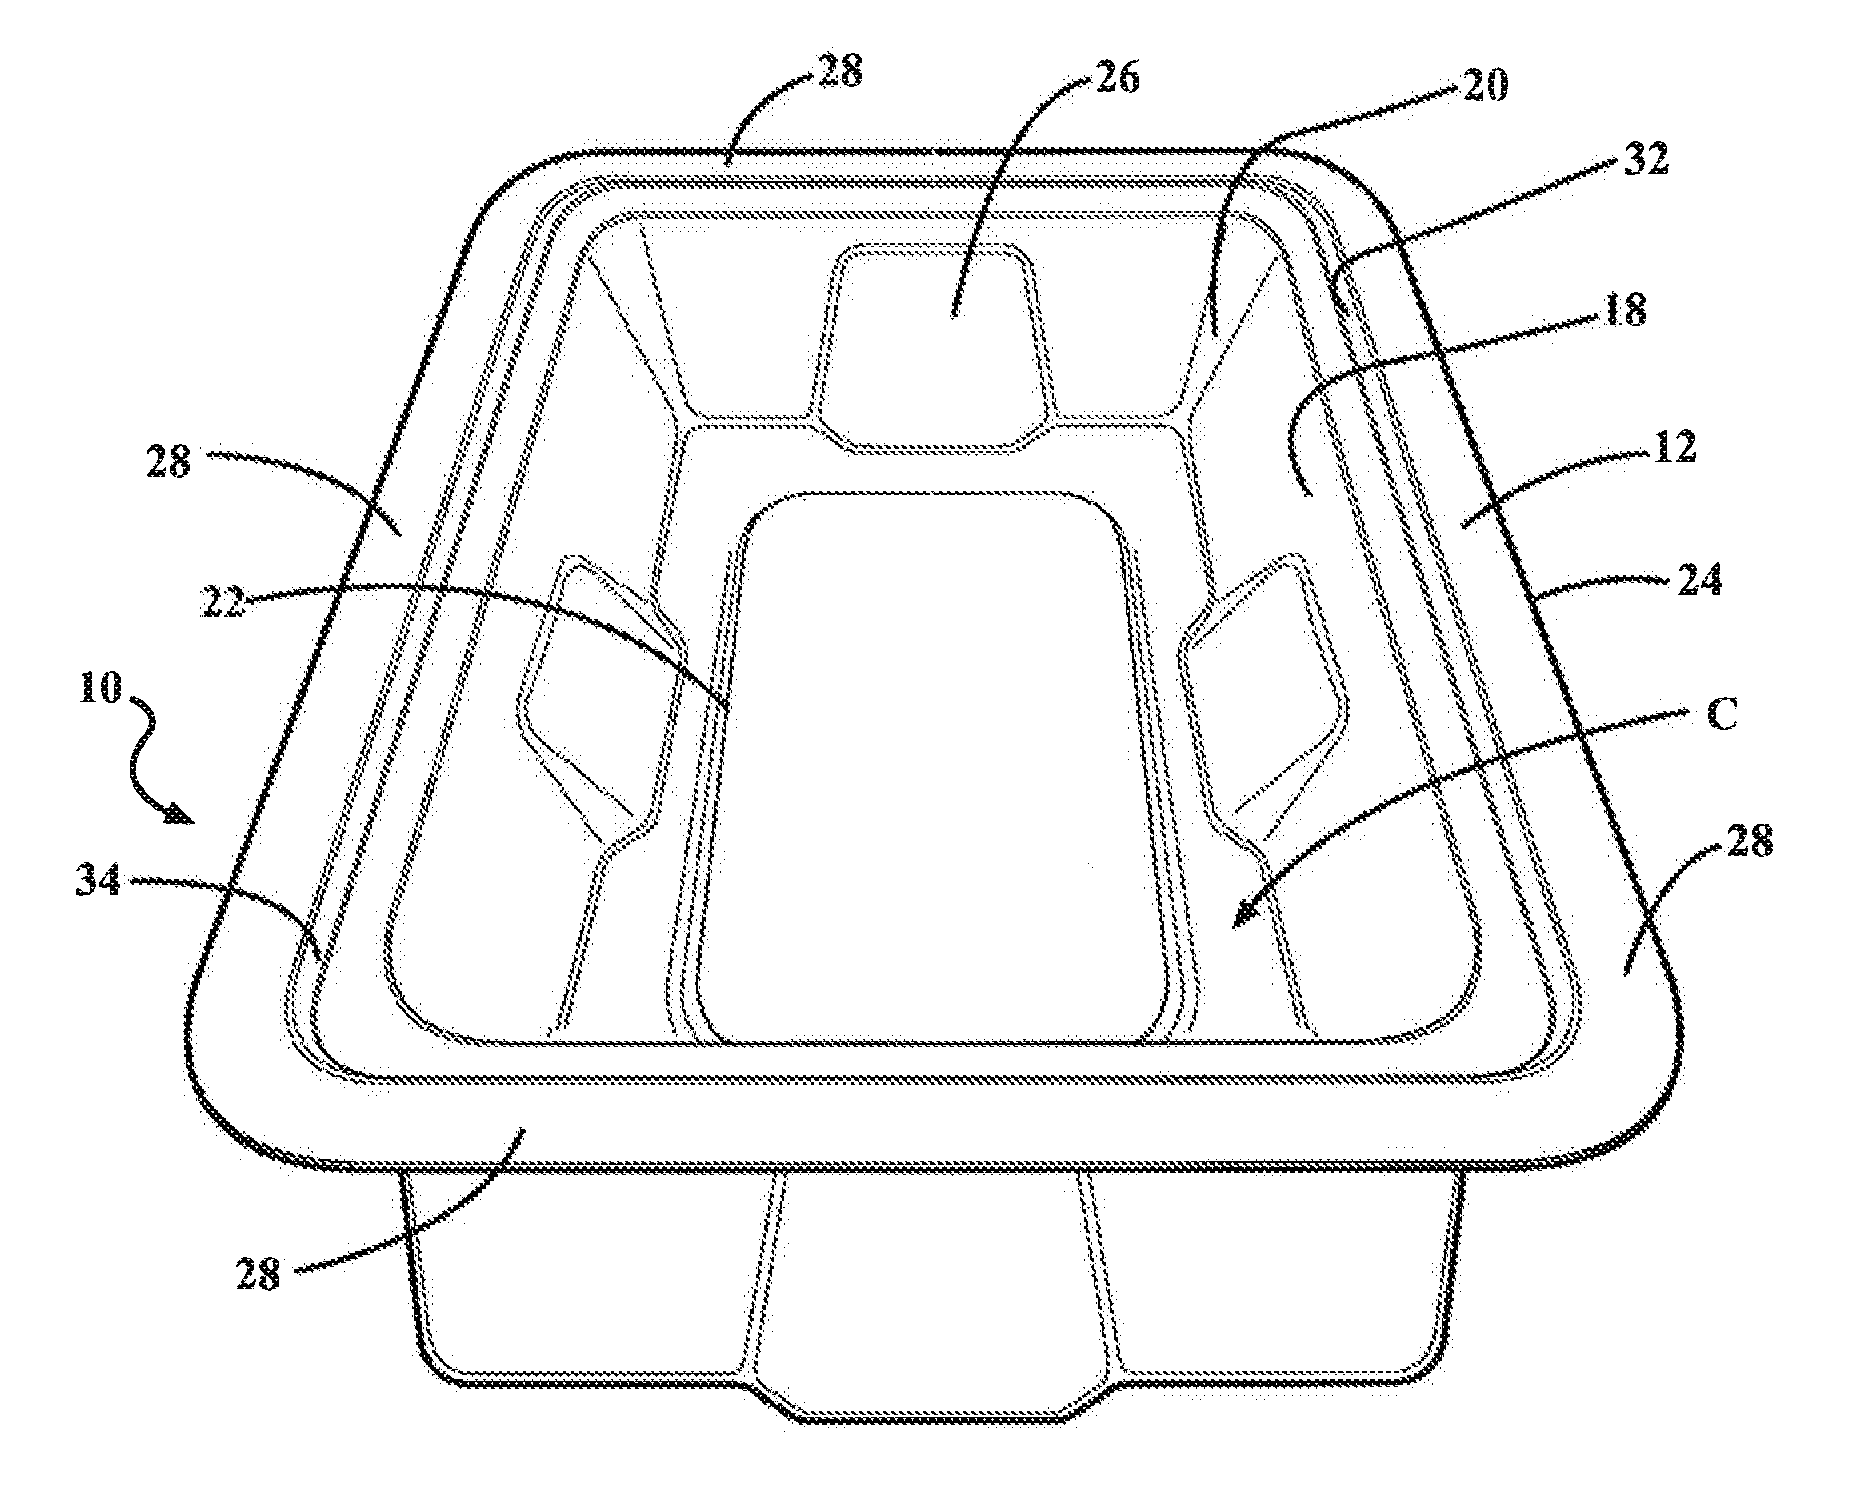 Composite for packaging a medical device and method of forming the same